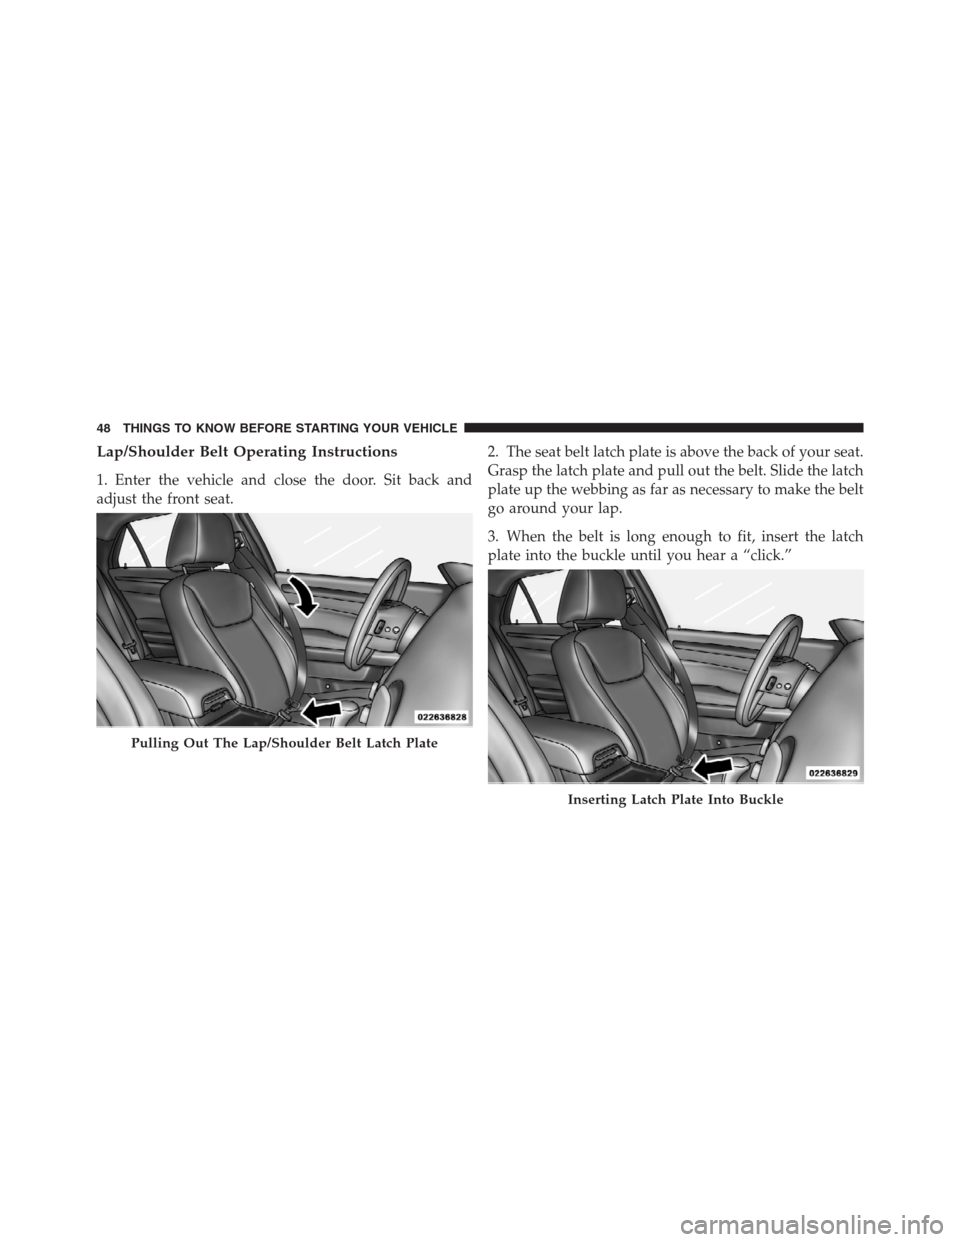 CHRYSLER 300 2012 2.G Service Manual Lap/Shoulder Belt Operating Instructions
1. Enter the vehicle and close the door. Sit back and
adjust the front seat.2. The seat belt latch plate is above the back of your seat.
Grasp the latch plate 